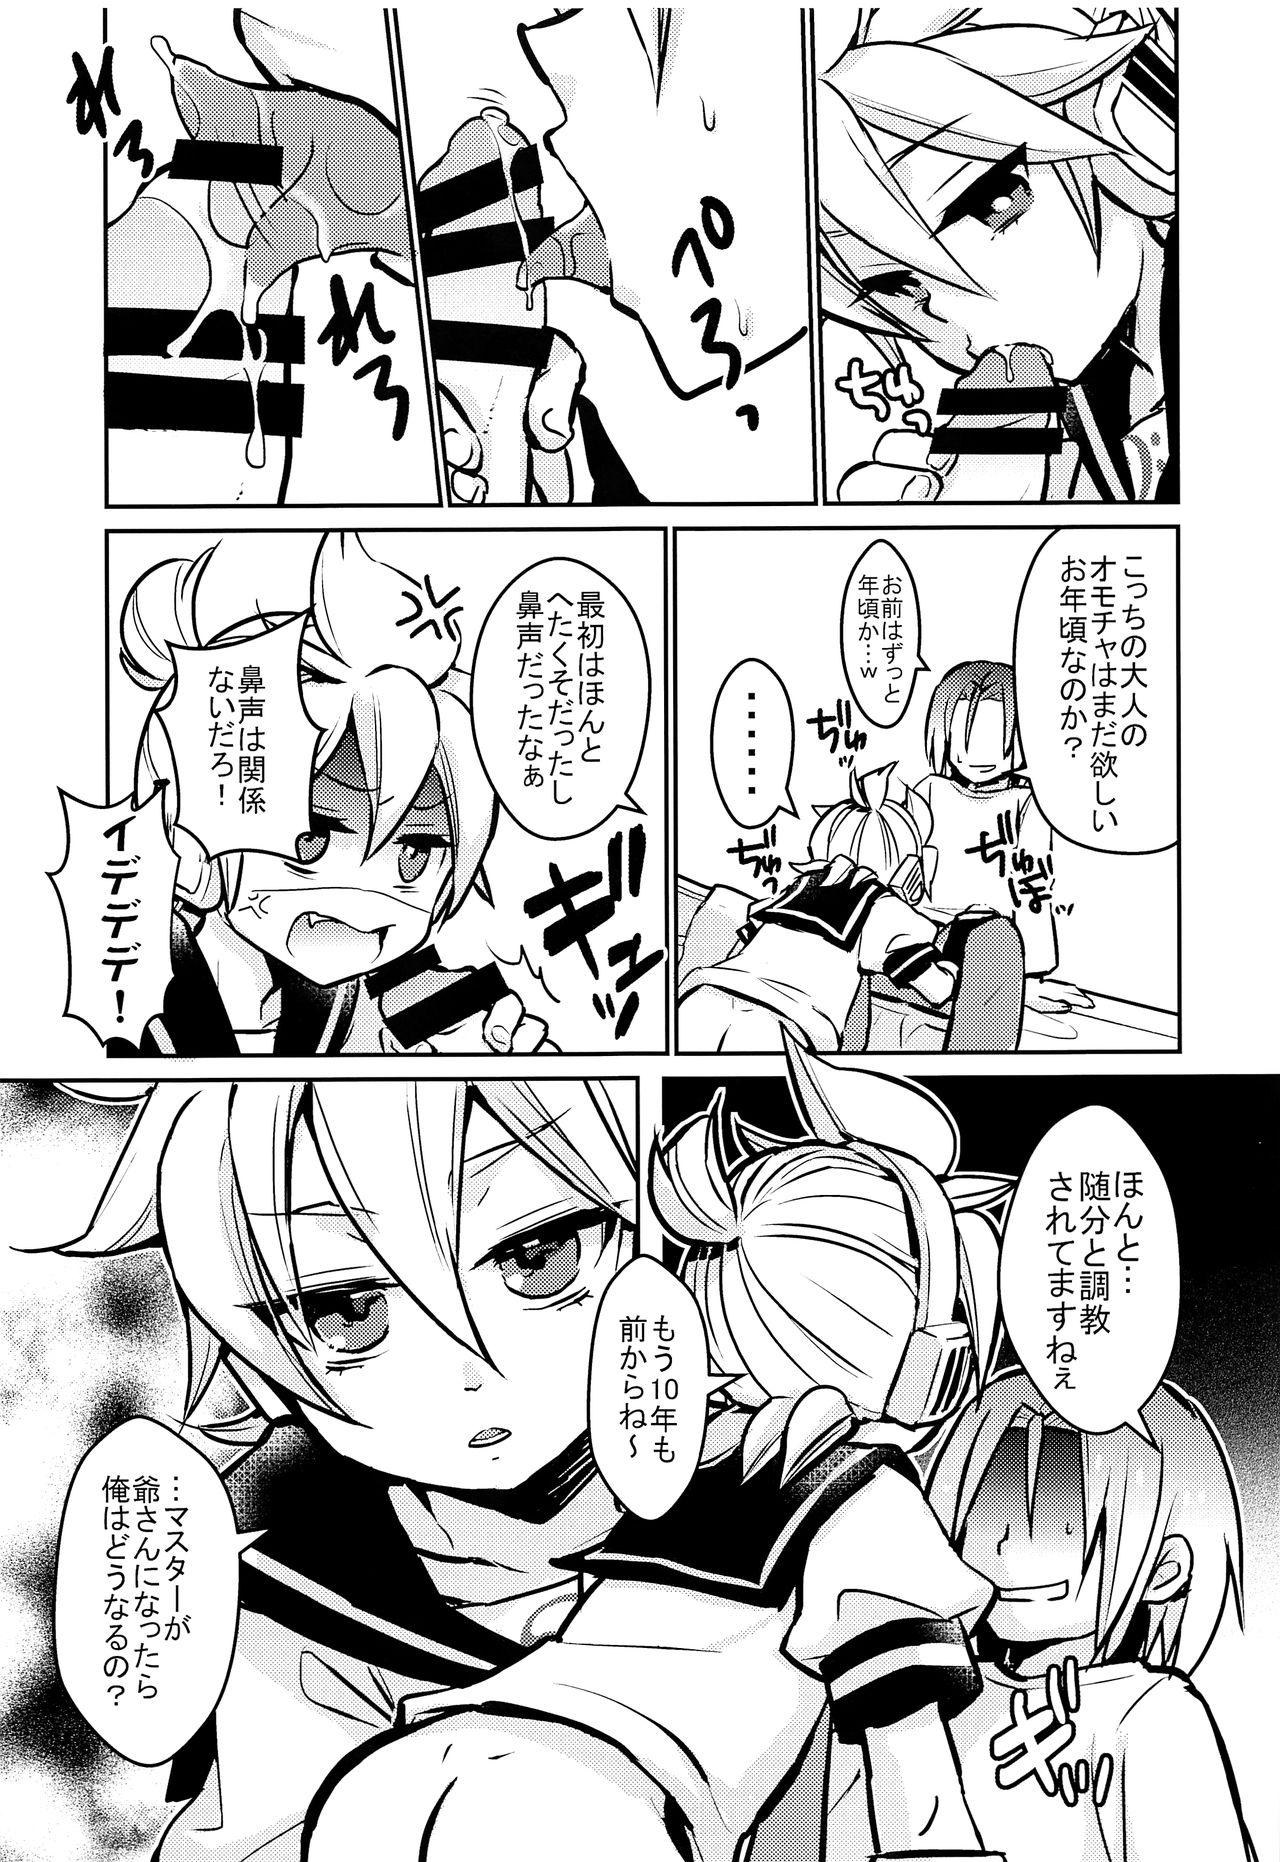 Hugetits Tenth - Vocaloid Pervert - Page 8